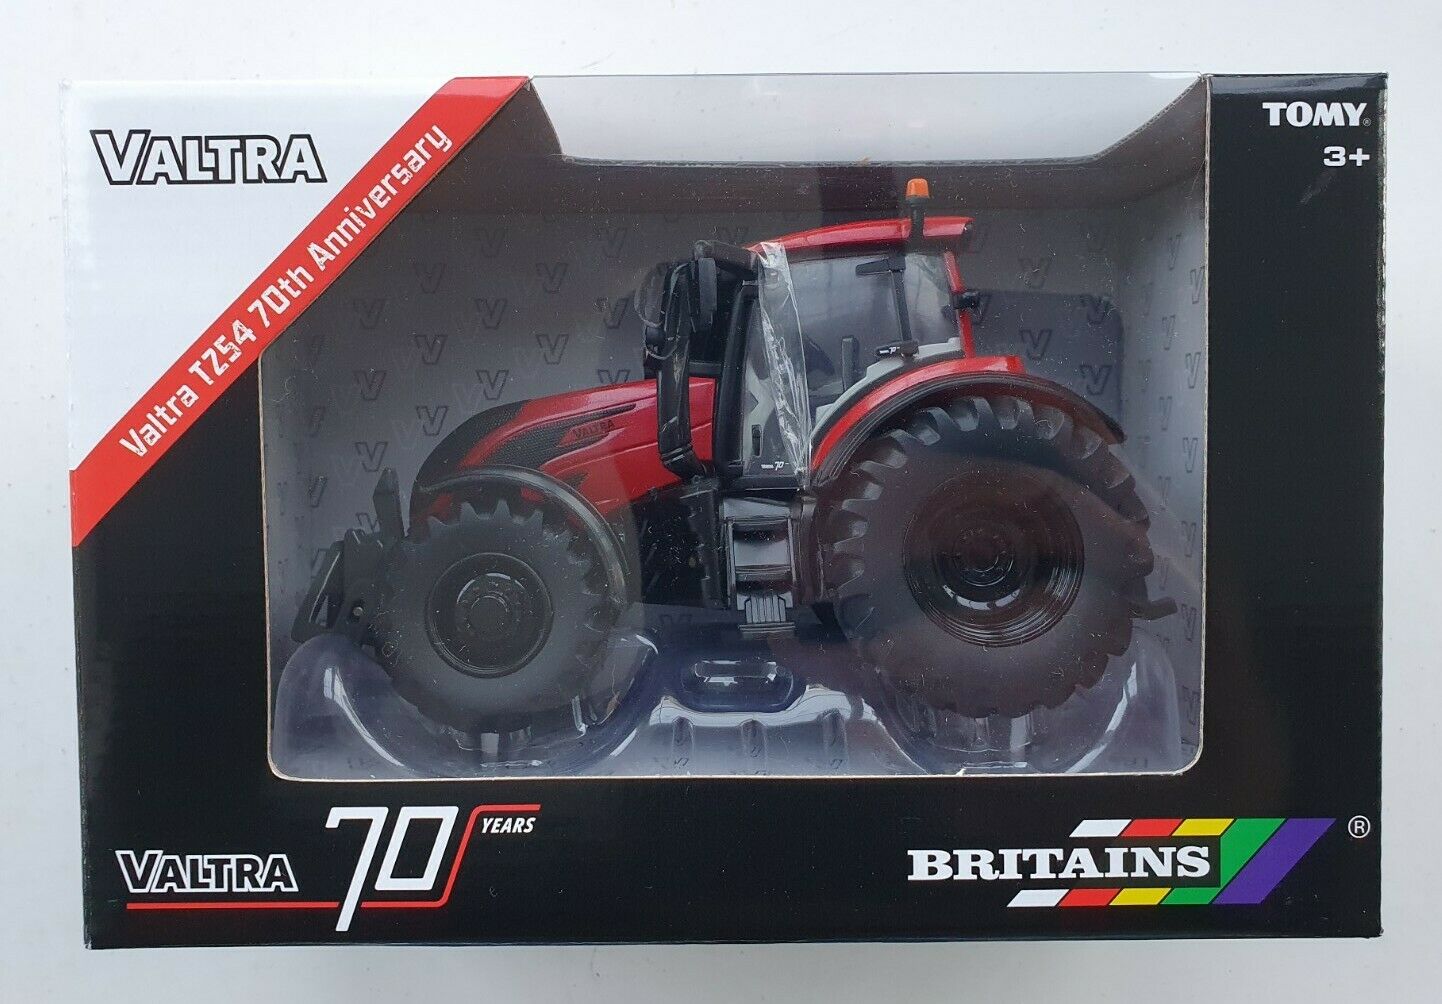 Tomy Britains 43215 1 32 Scale Valtra T254v Tractor of The Year for sale online 